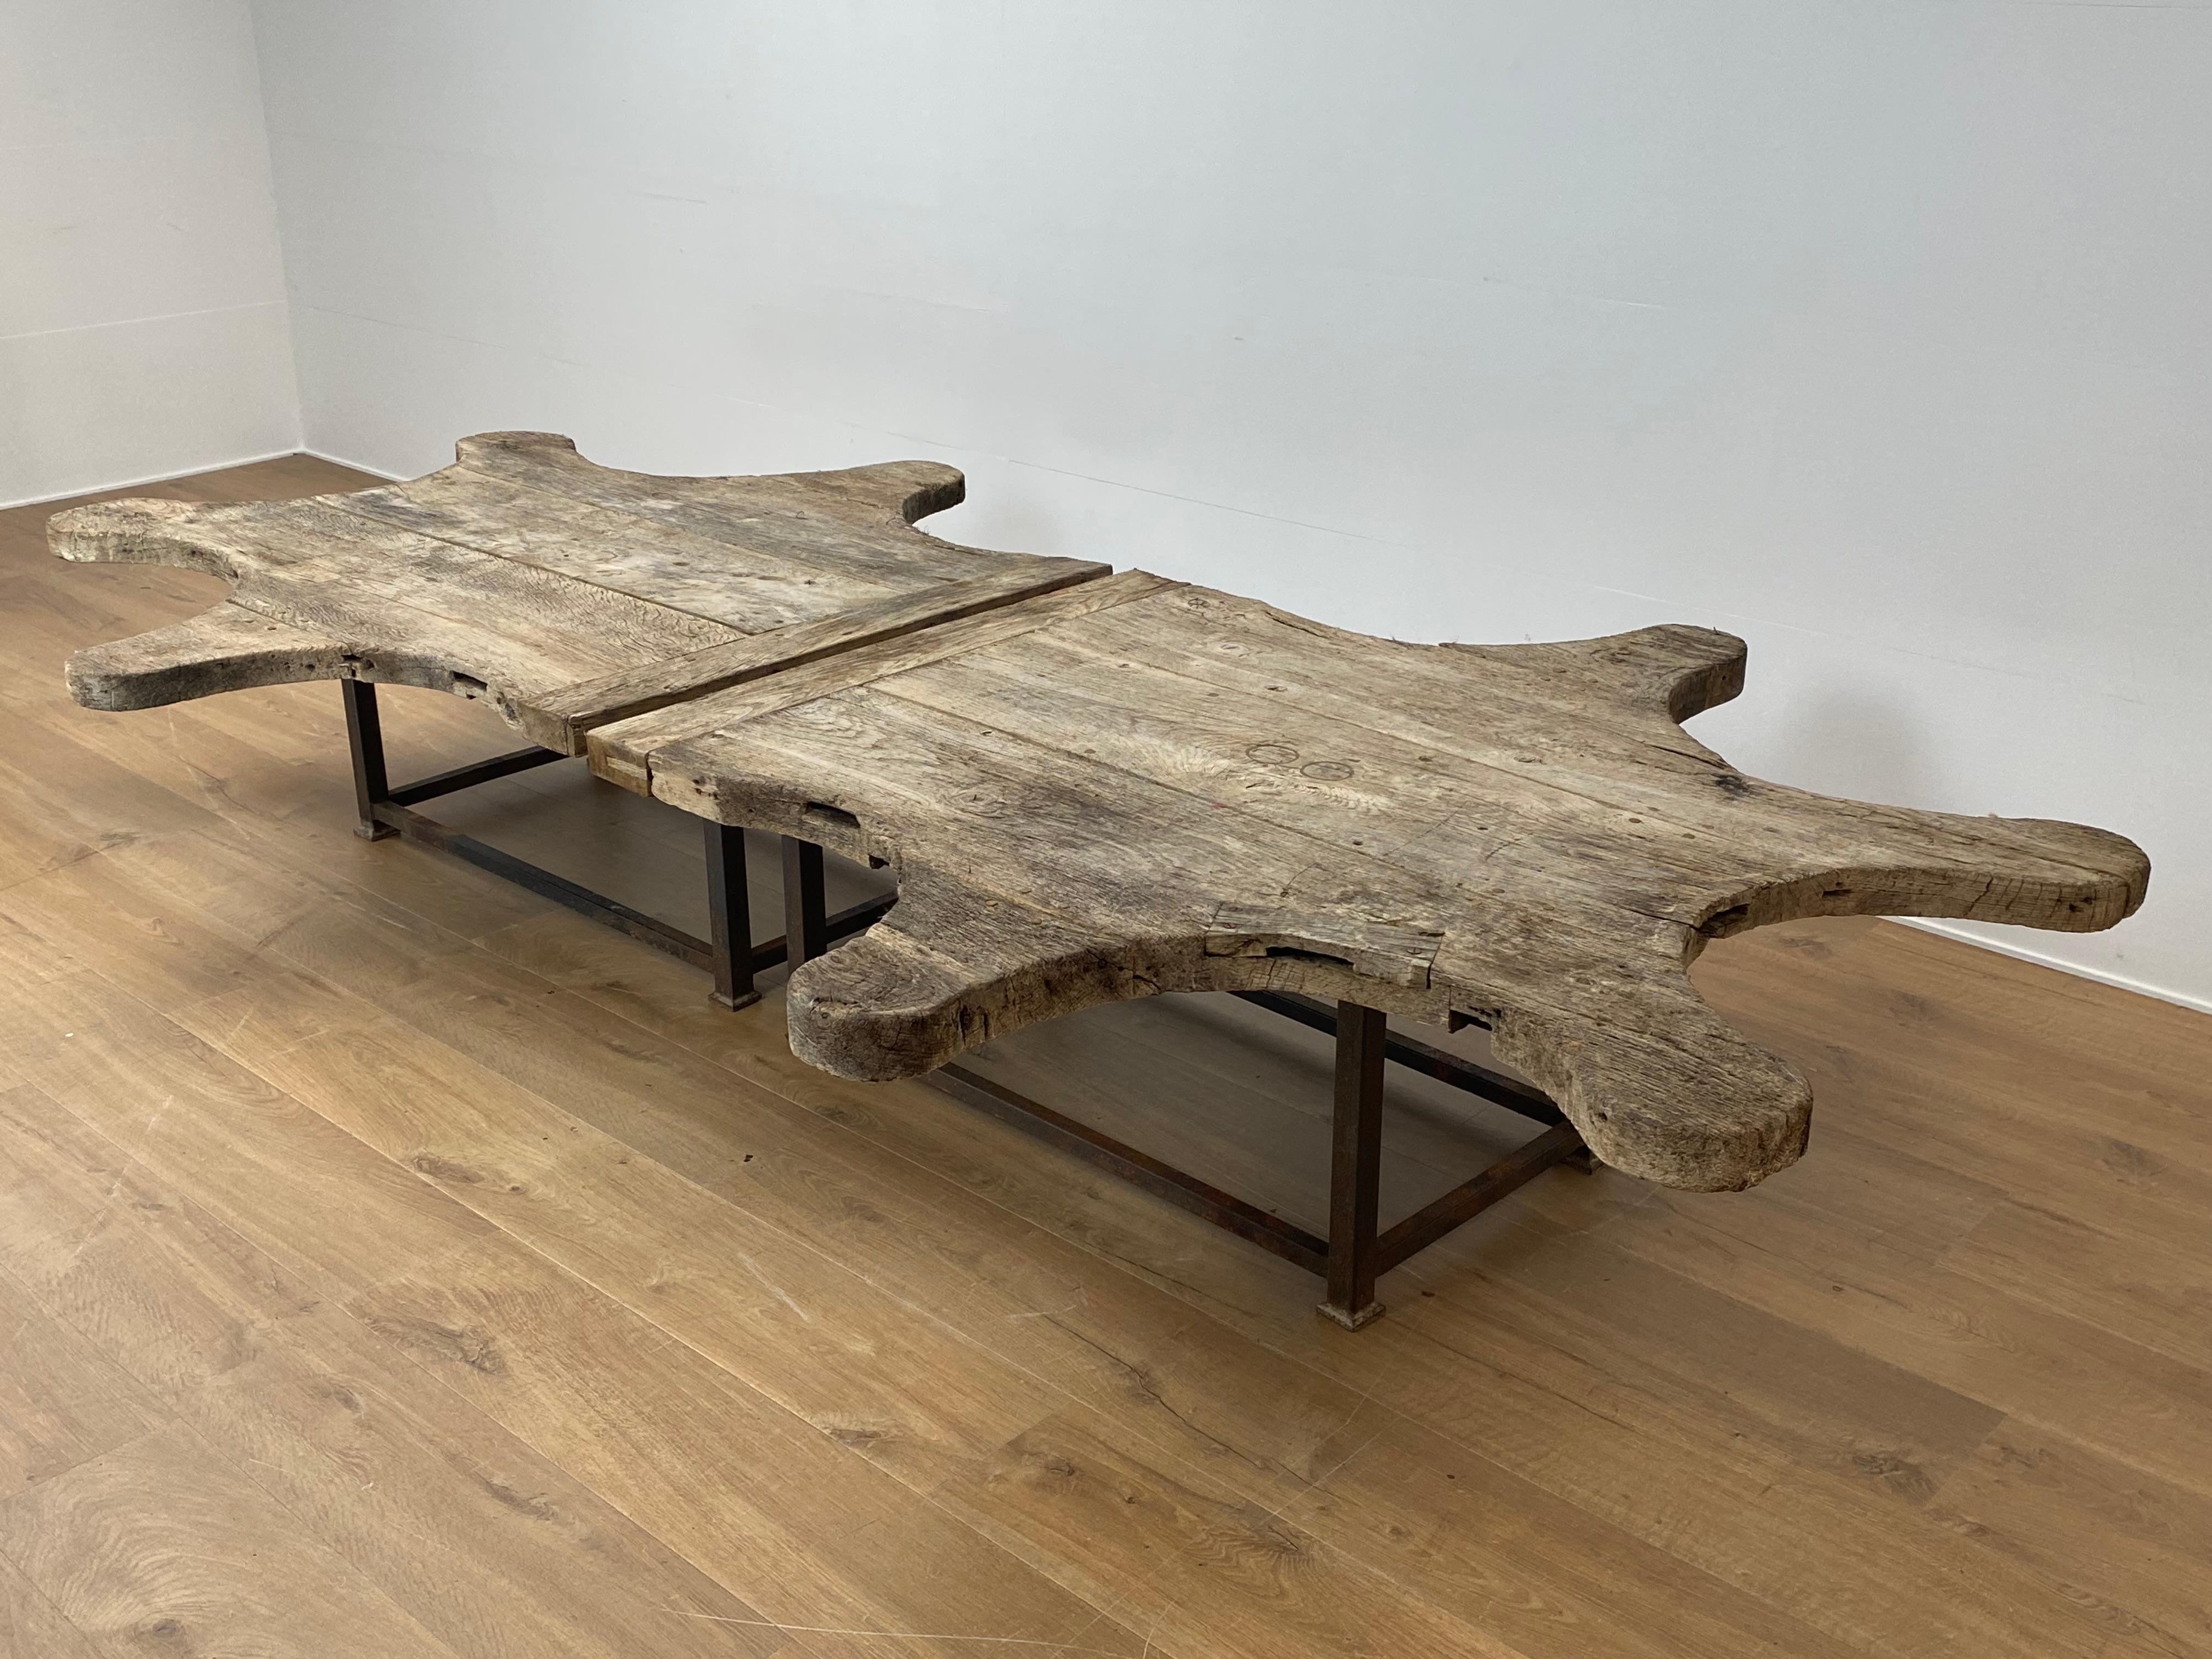 Exceptional Industrial, Brutalist Sofa Table from France, from 1930,
made of 2 Industrial Working Tables from A Jewelry Factory,
based on a brutalist Iron Base,
the Oak wood has a superbe old patina and shine and shows signs of use
and wear,
very